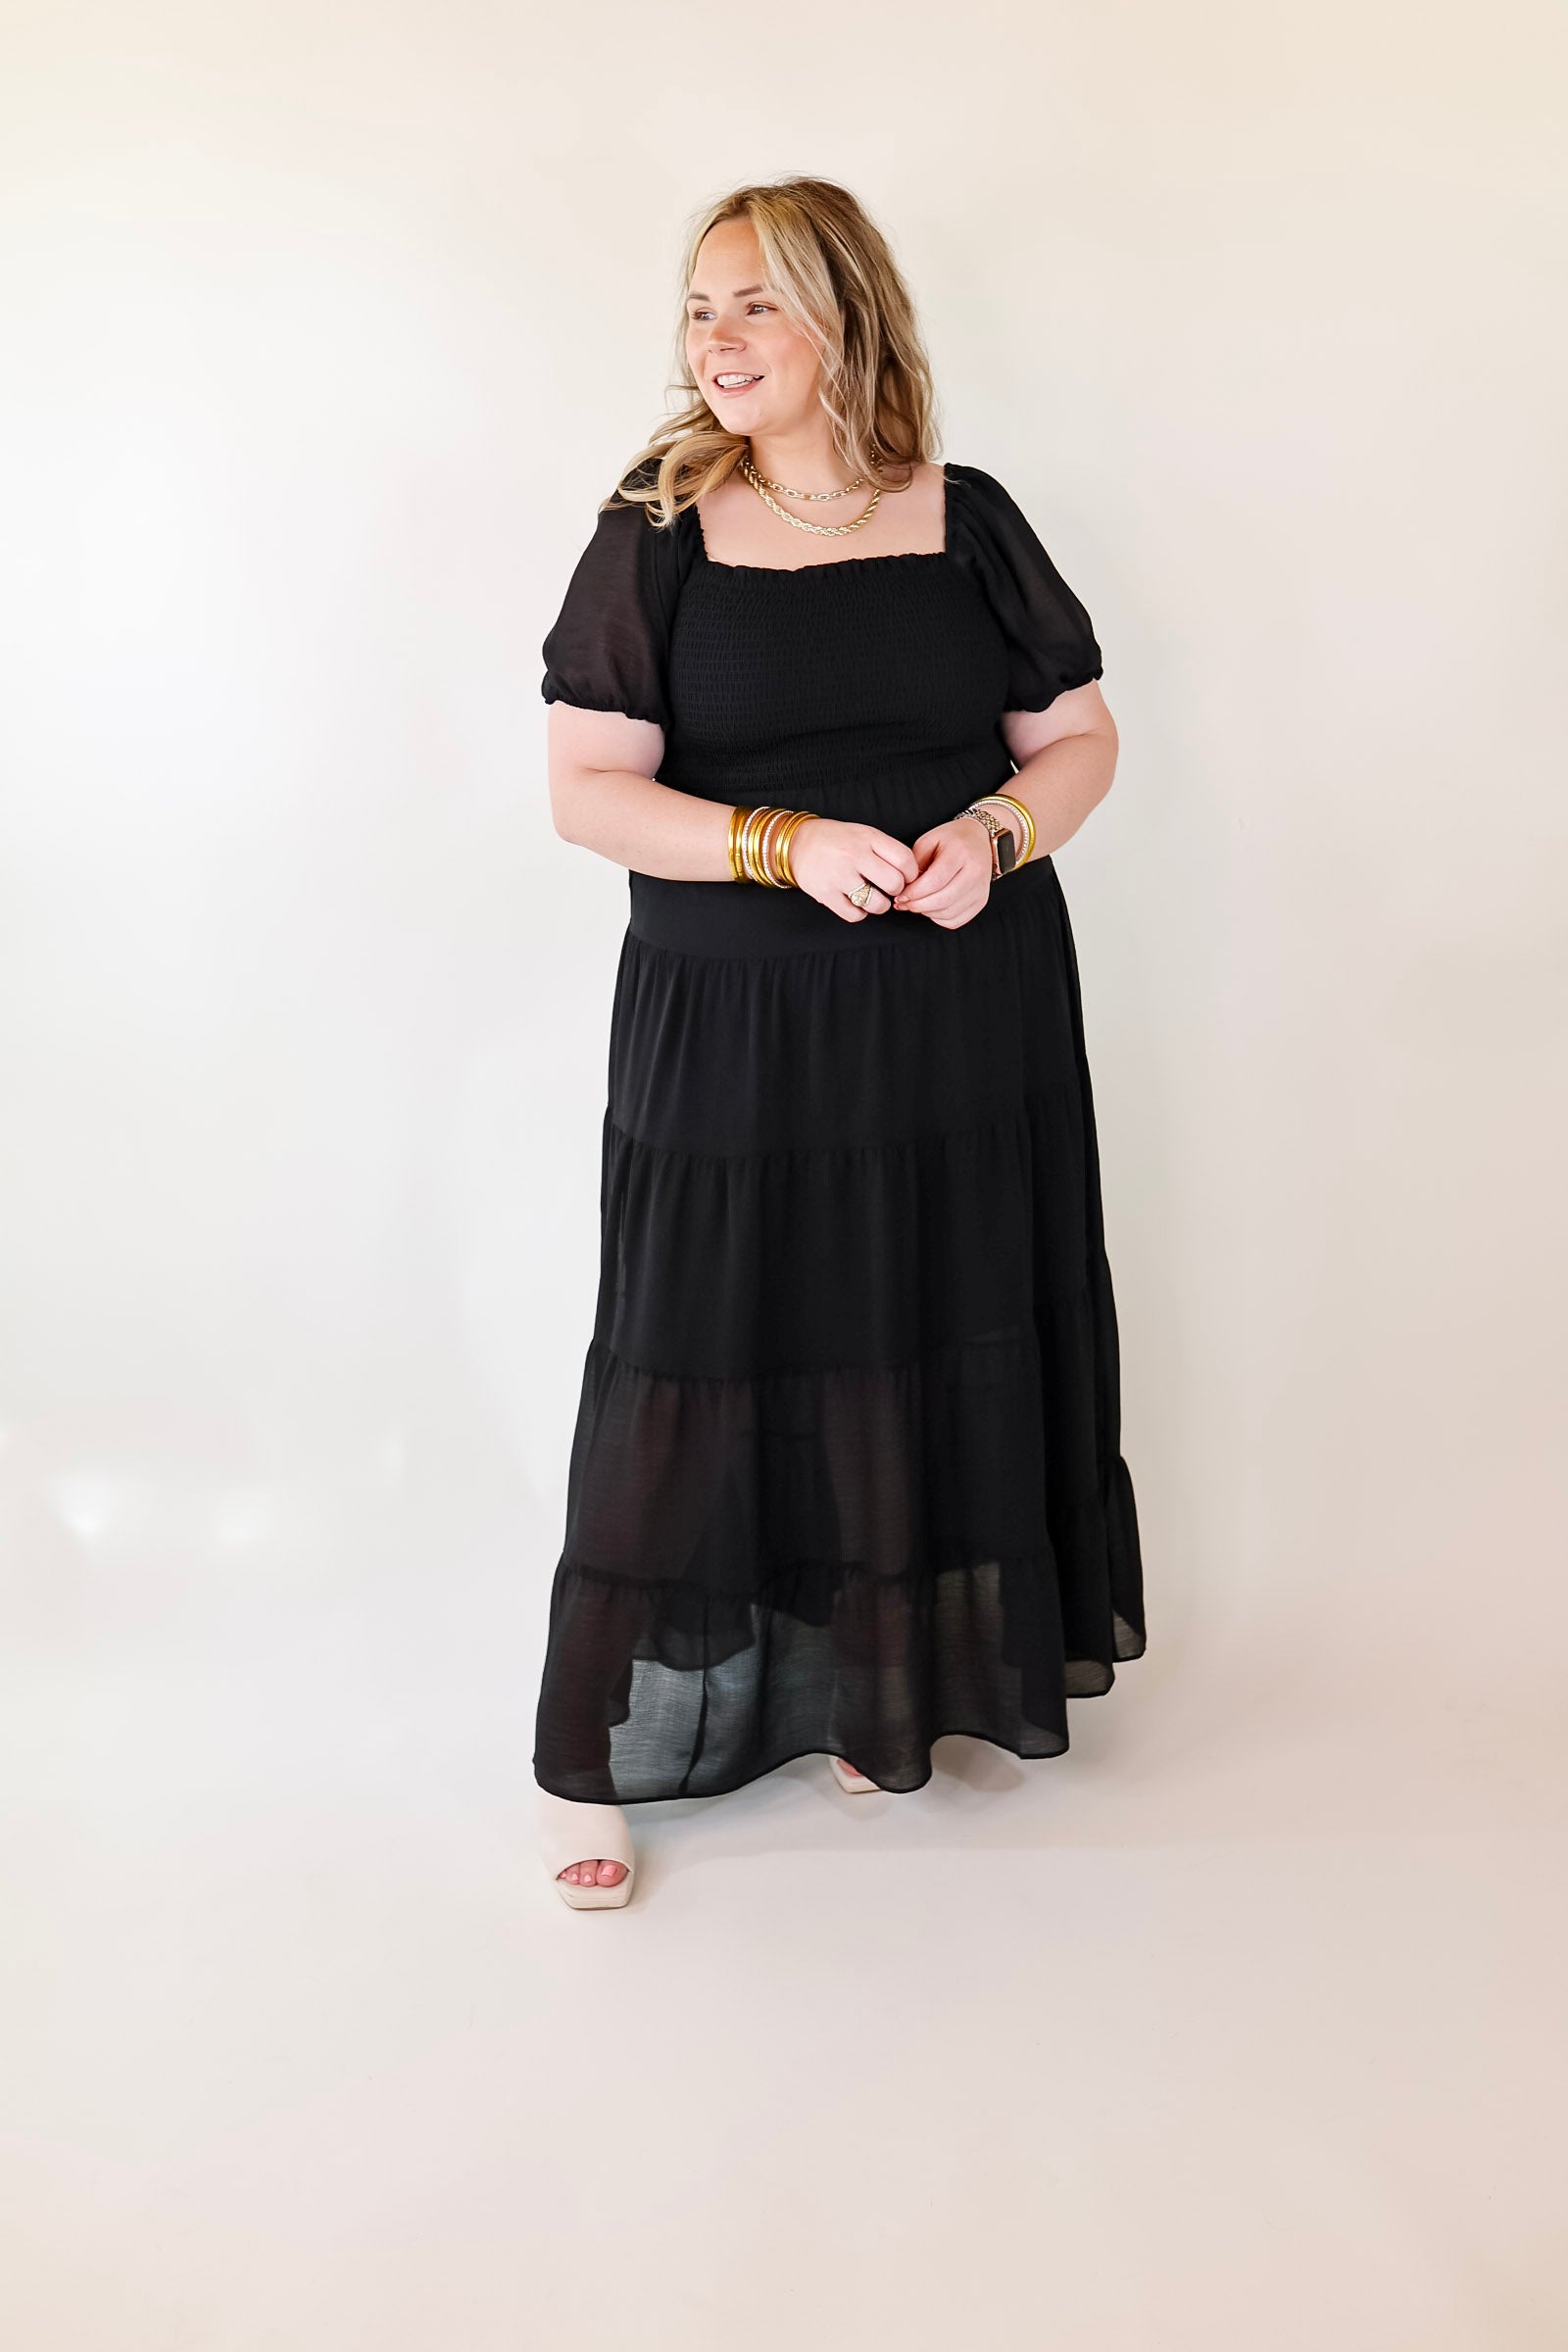 Honeysuckle Love Tiered Maxi Dress with Smocked Bodice in Black